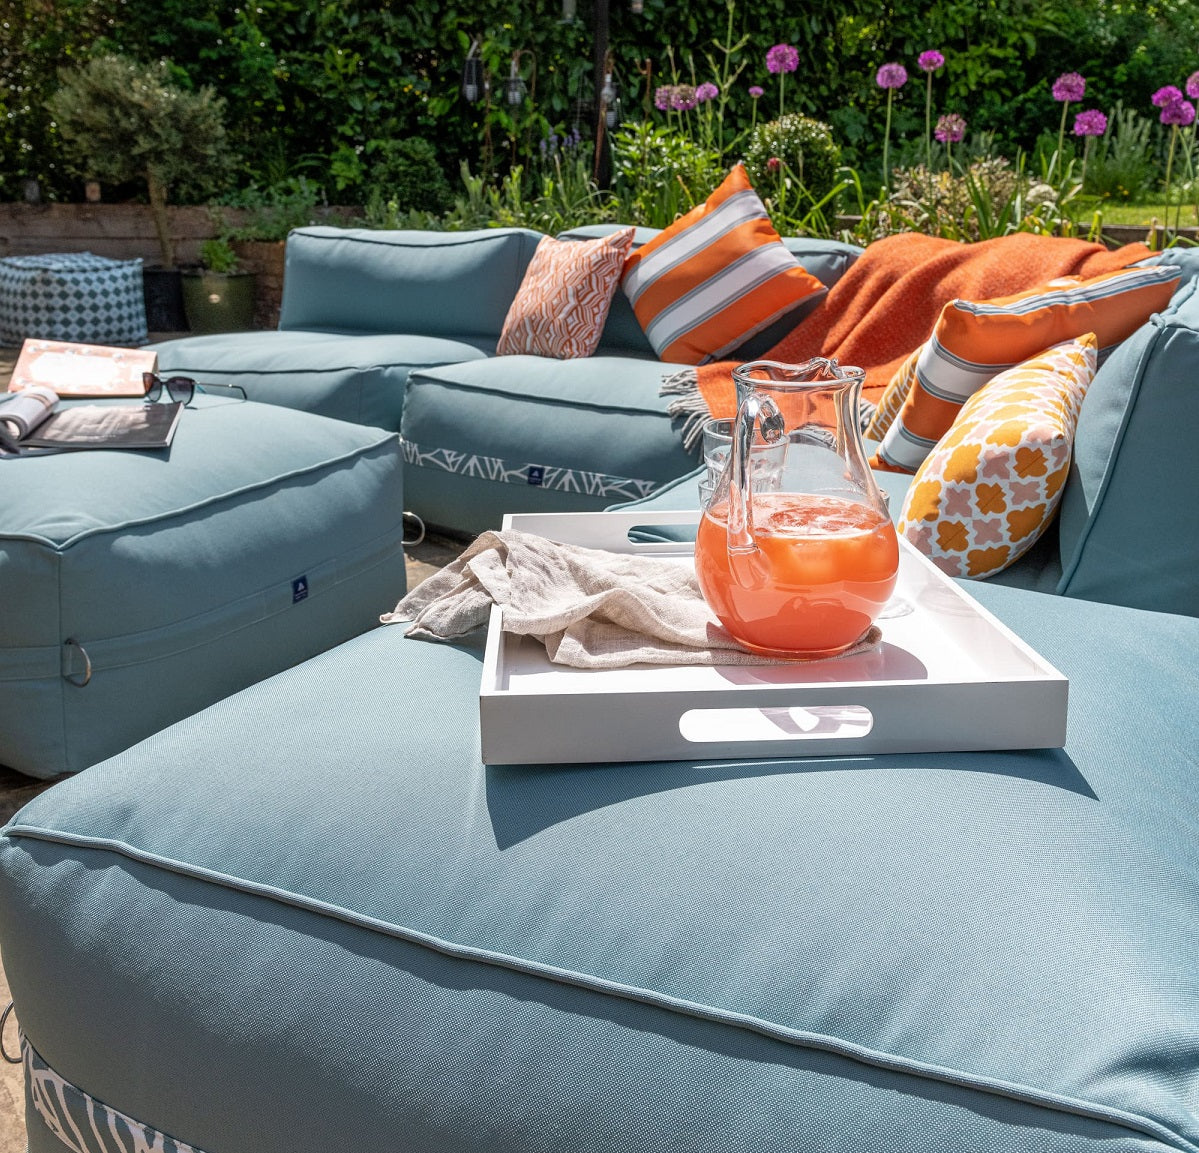 Garden sofa and ottoman in ocean blue, with bright orange weatherproof cushions